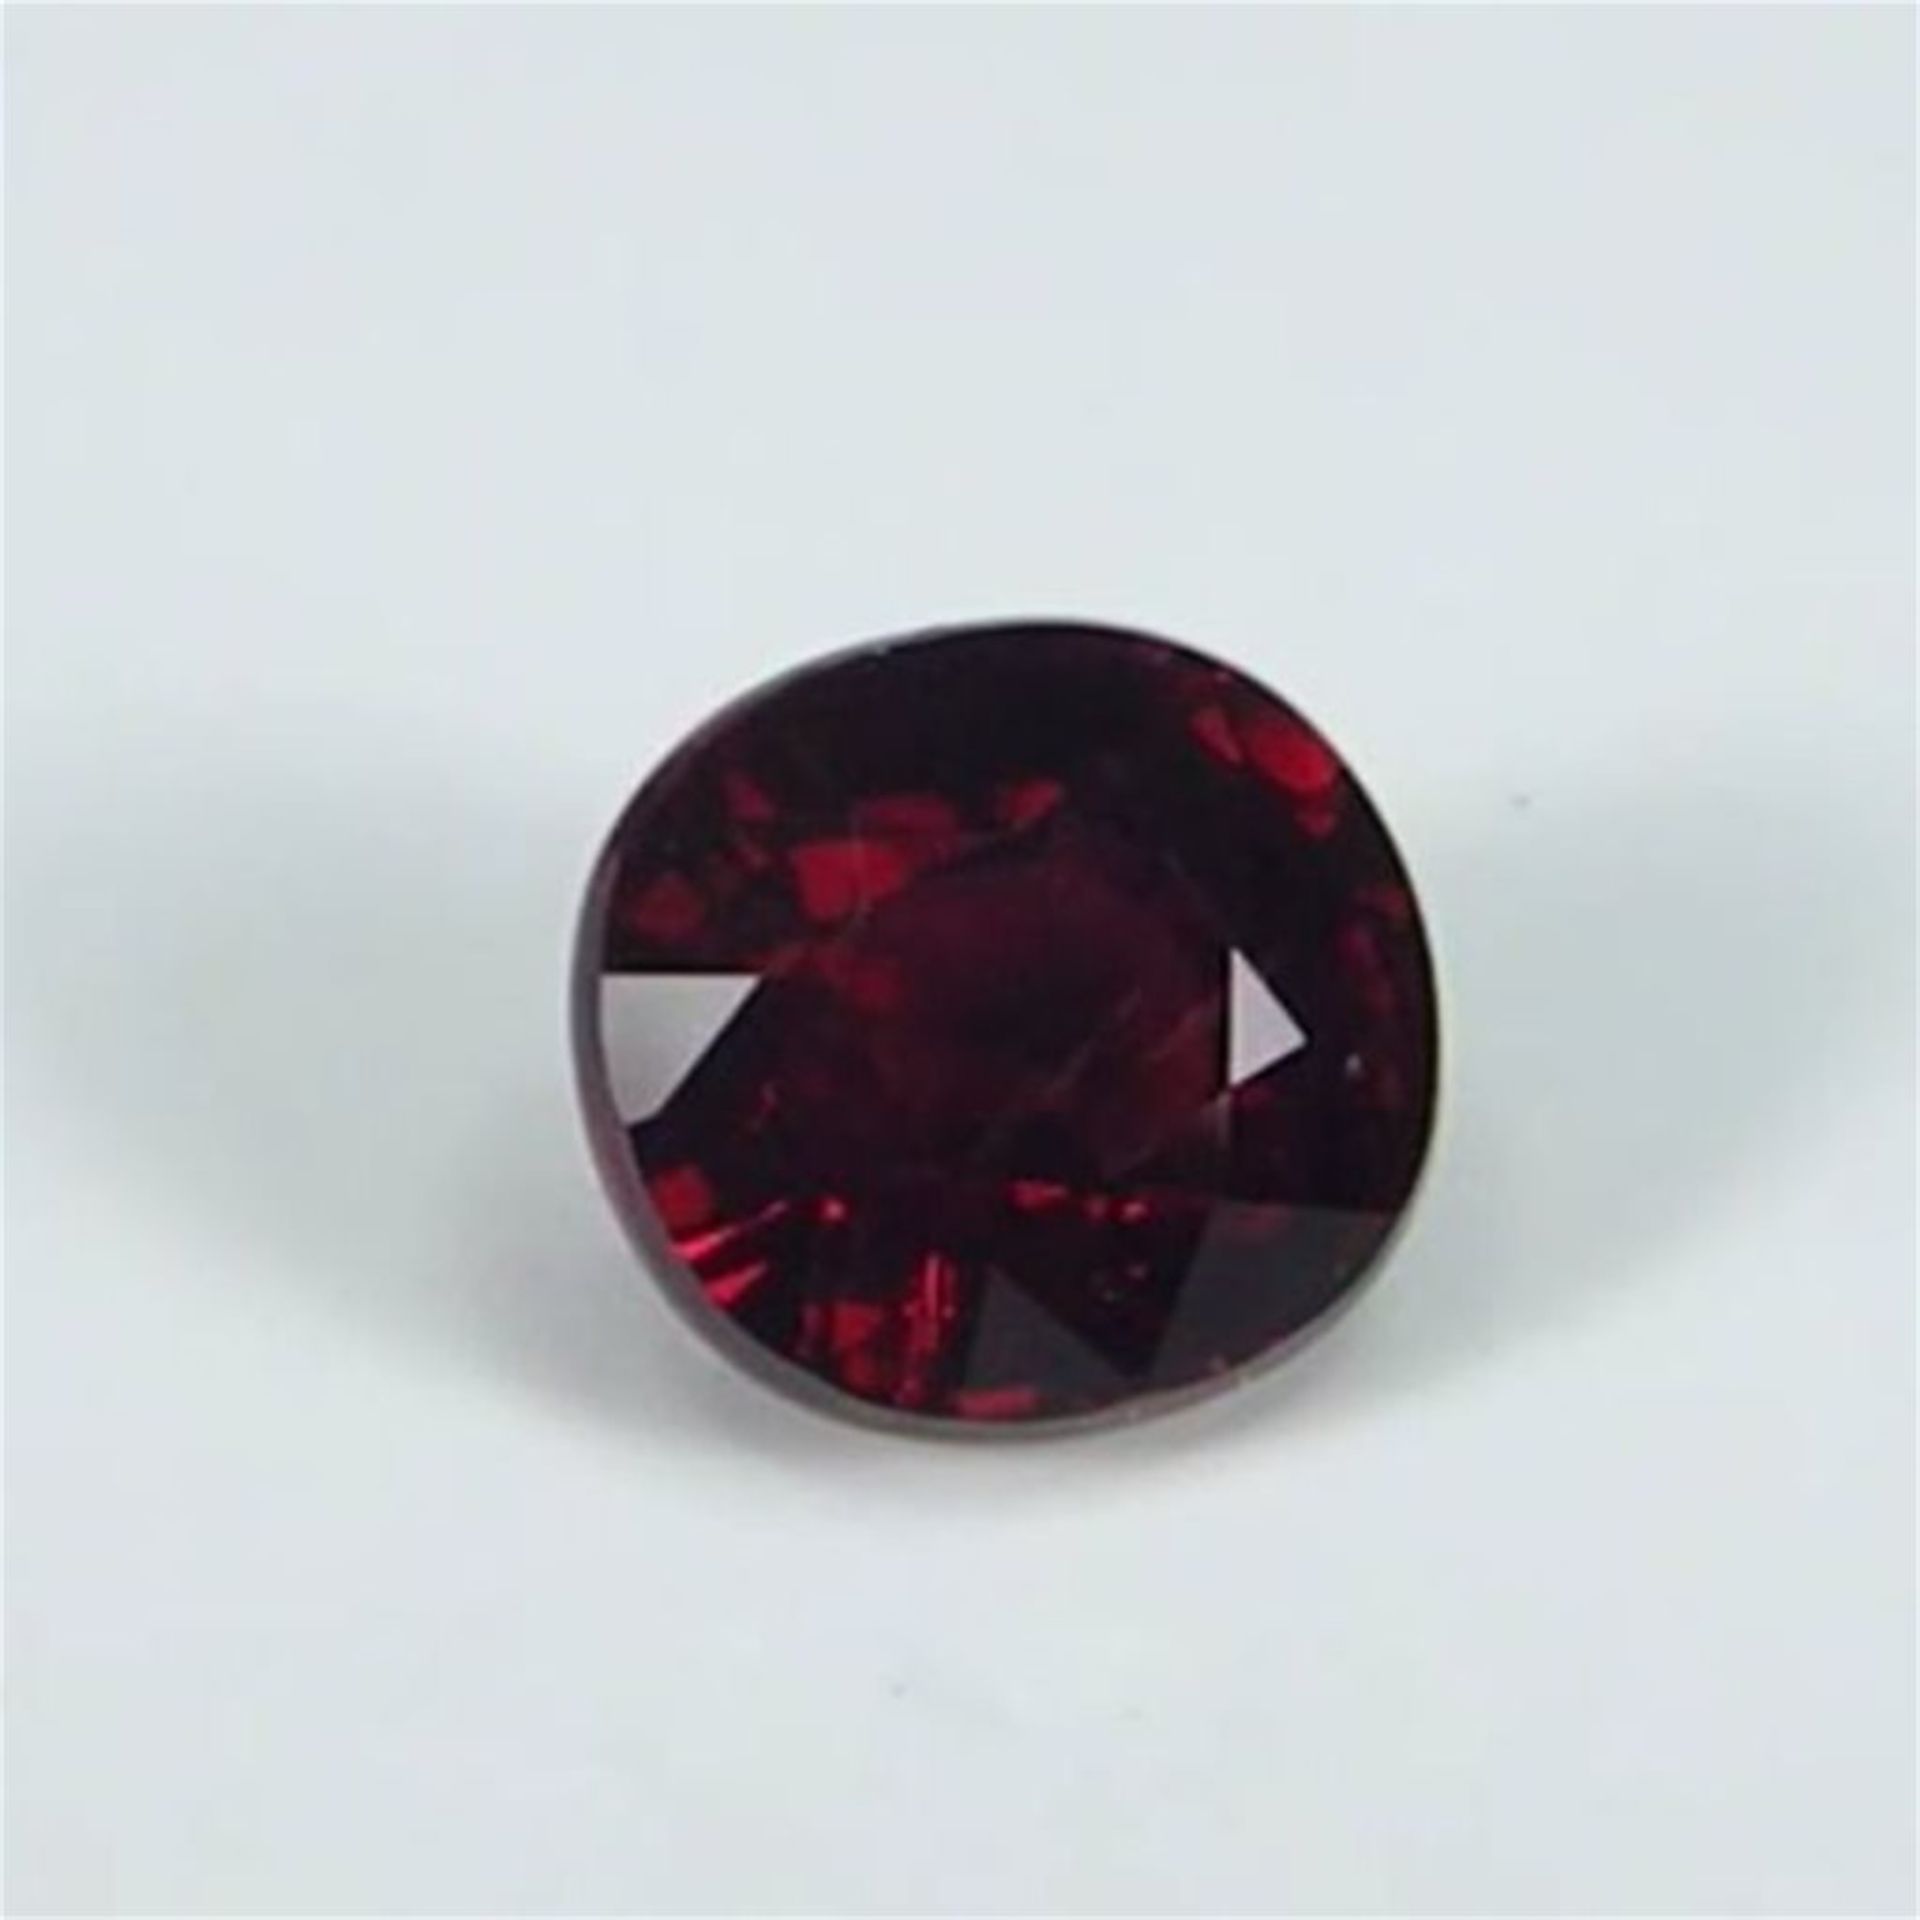 GIA Certified 1.09 ct. Untreated Pigeon’s Blood Ruby - BURMA - Image 4 of 10